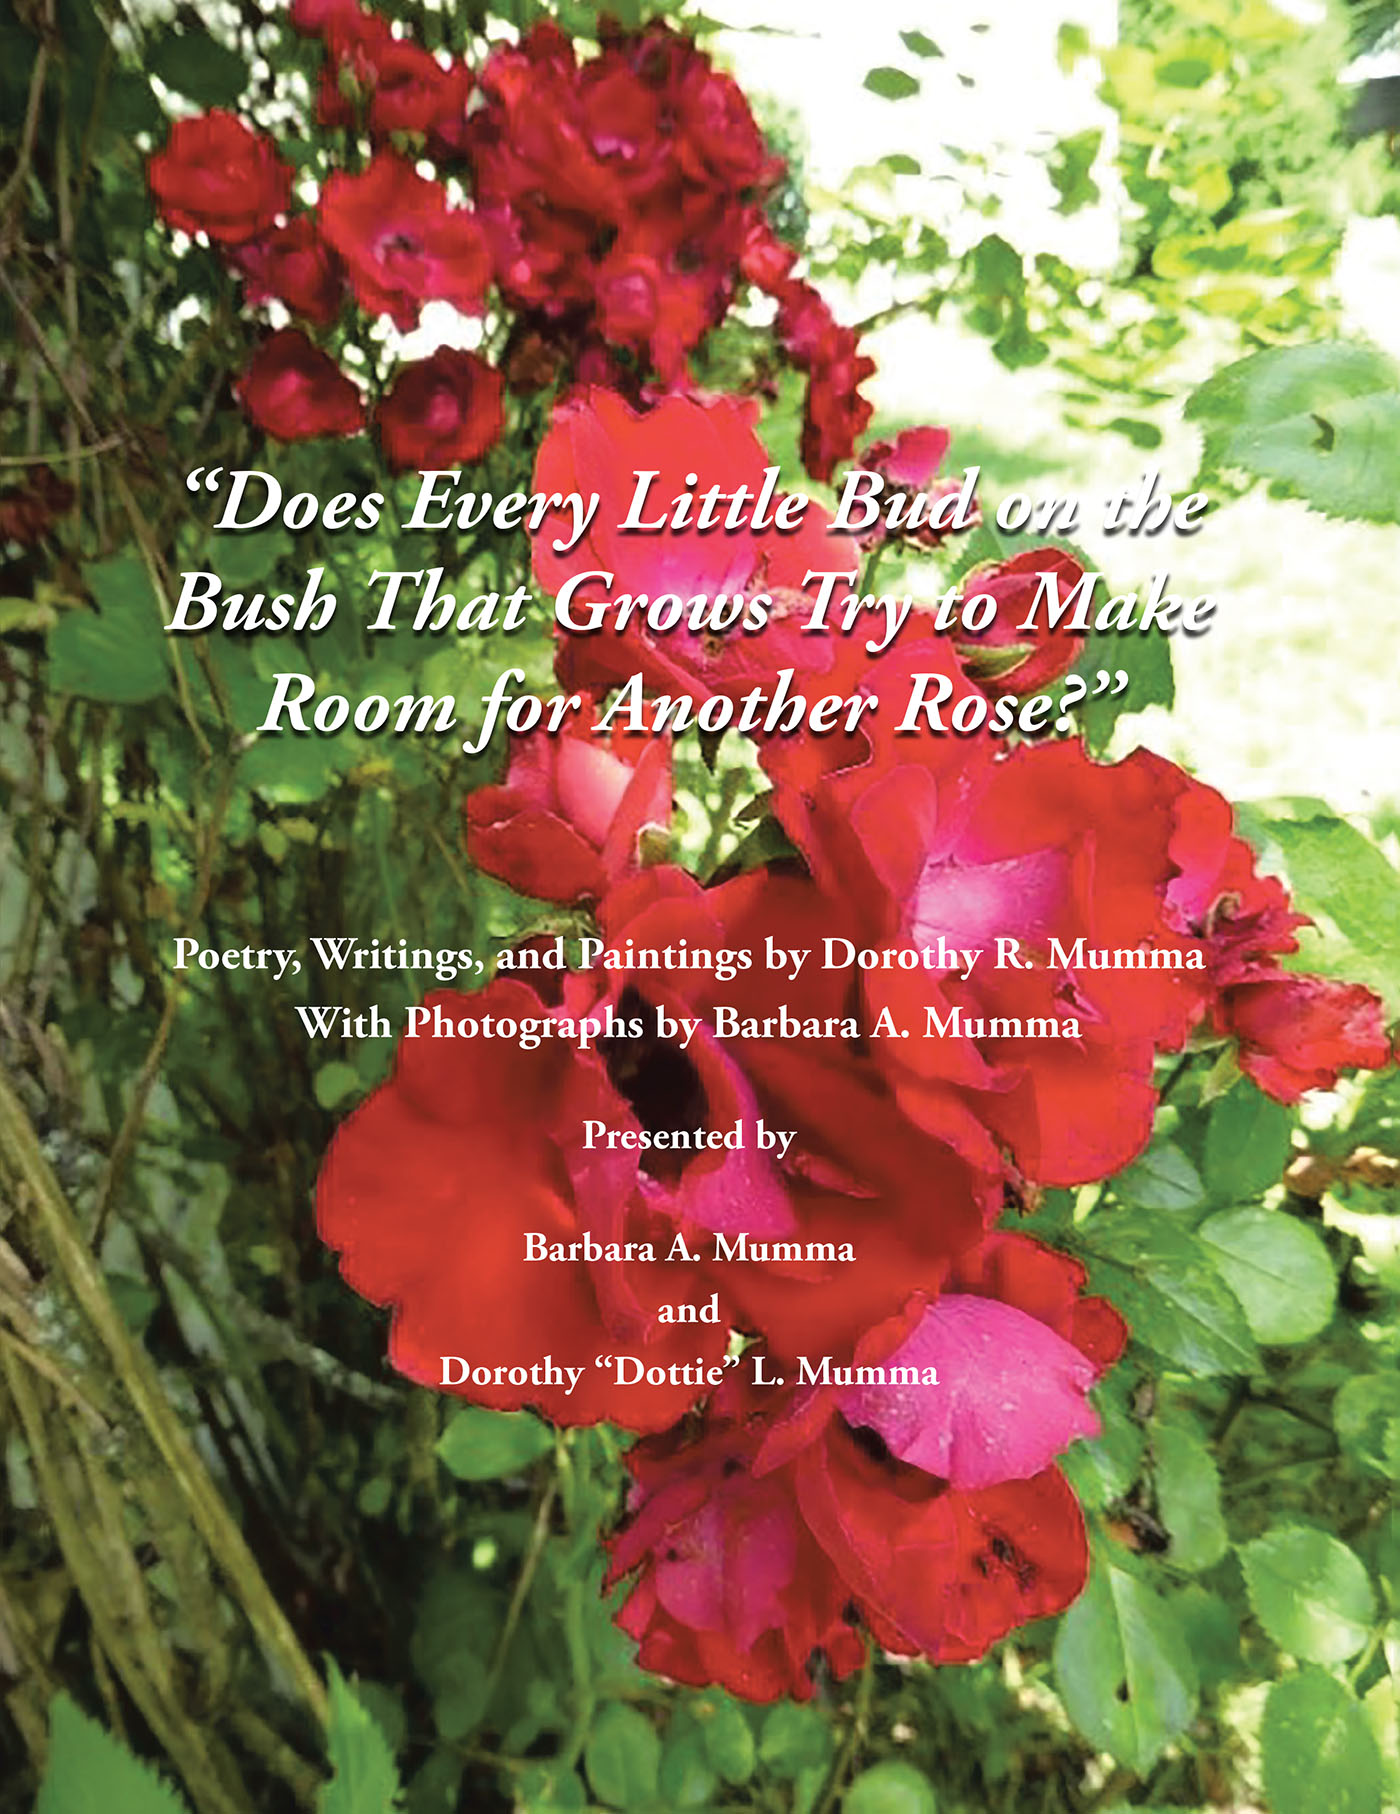 Barbara A. Mumma and Dorothy “Dottie” L. Mumma’s Newly Released “Does Every Little Bud on the Bush That Grows Try to Make Room for Another Rose?” is Full of Inspiration